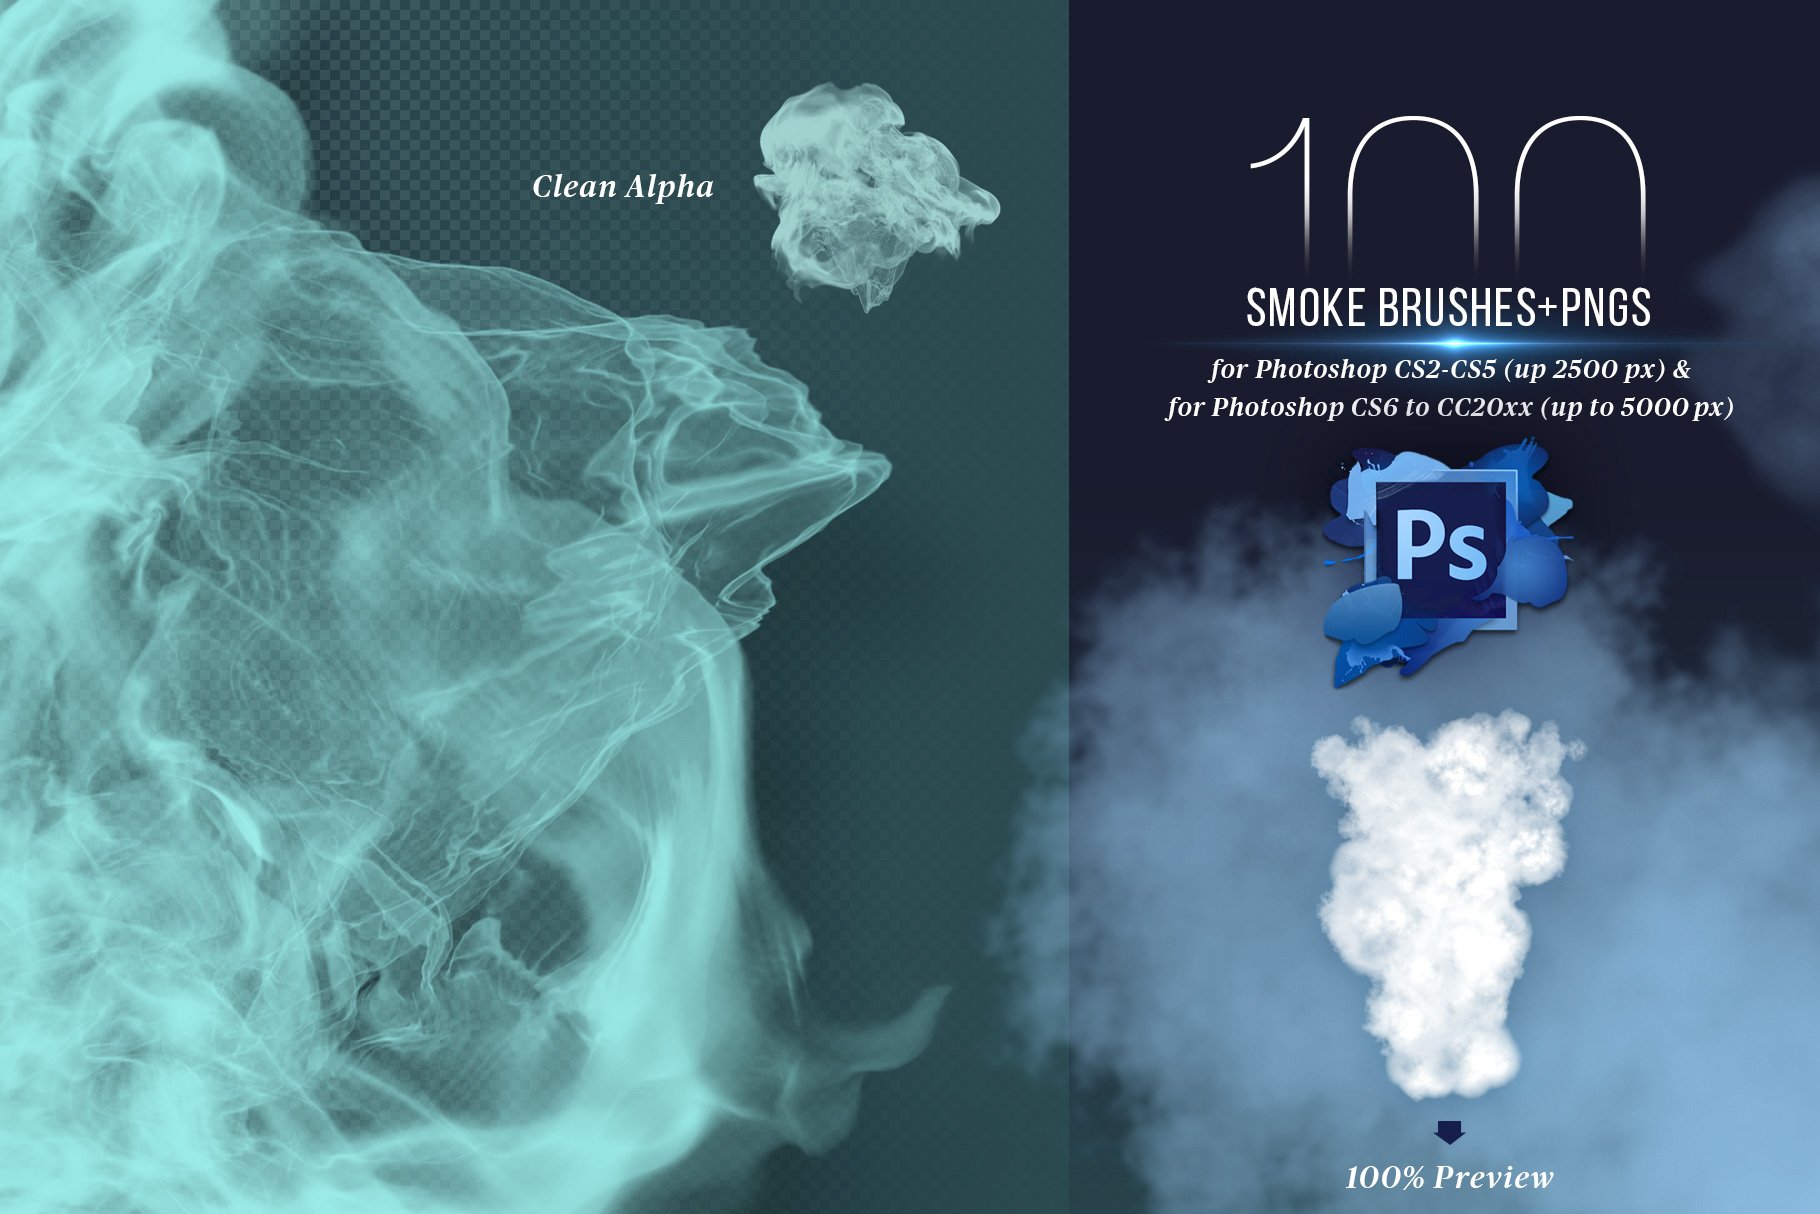 100 smoke brushes for photoshop and pngs preview 03 819